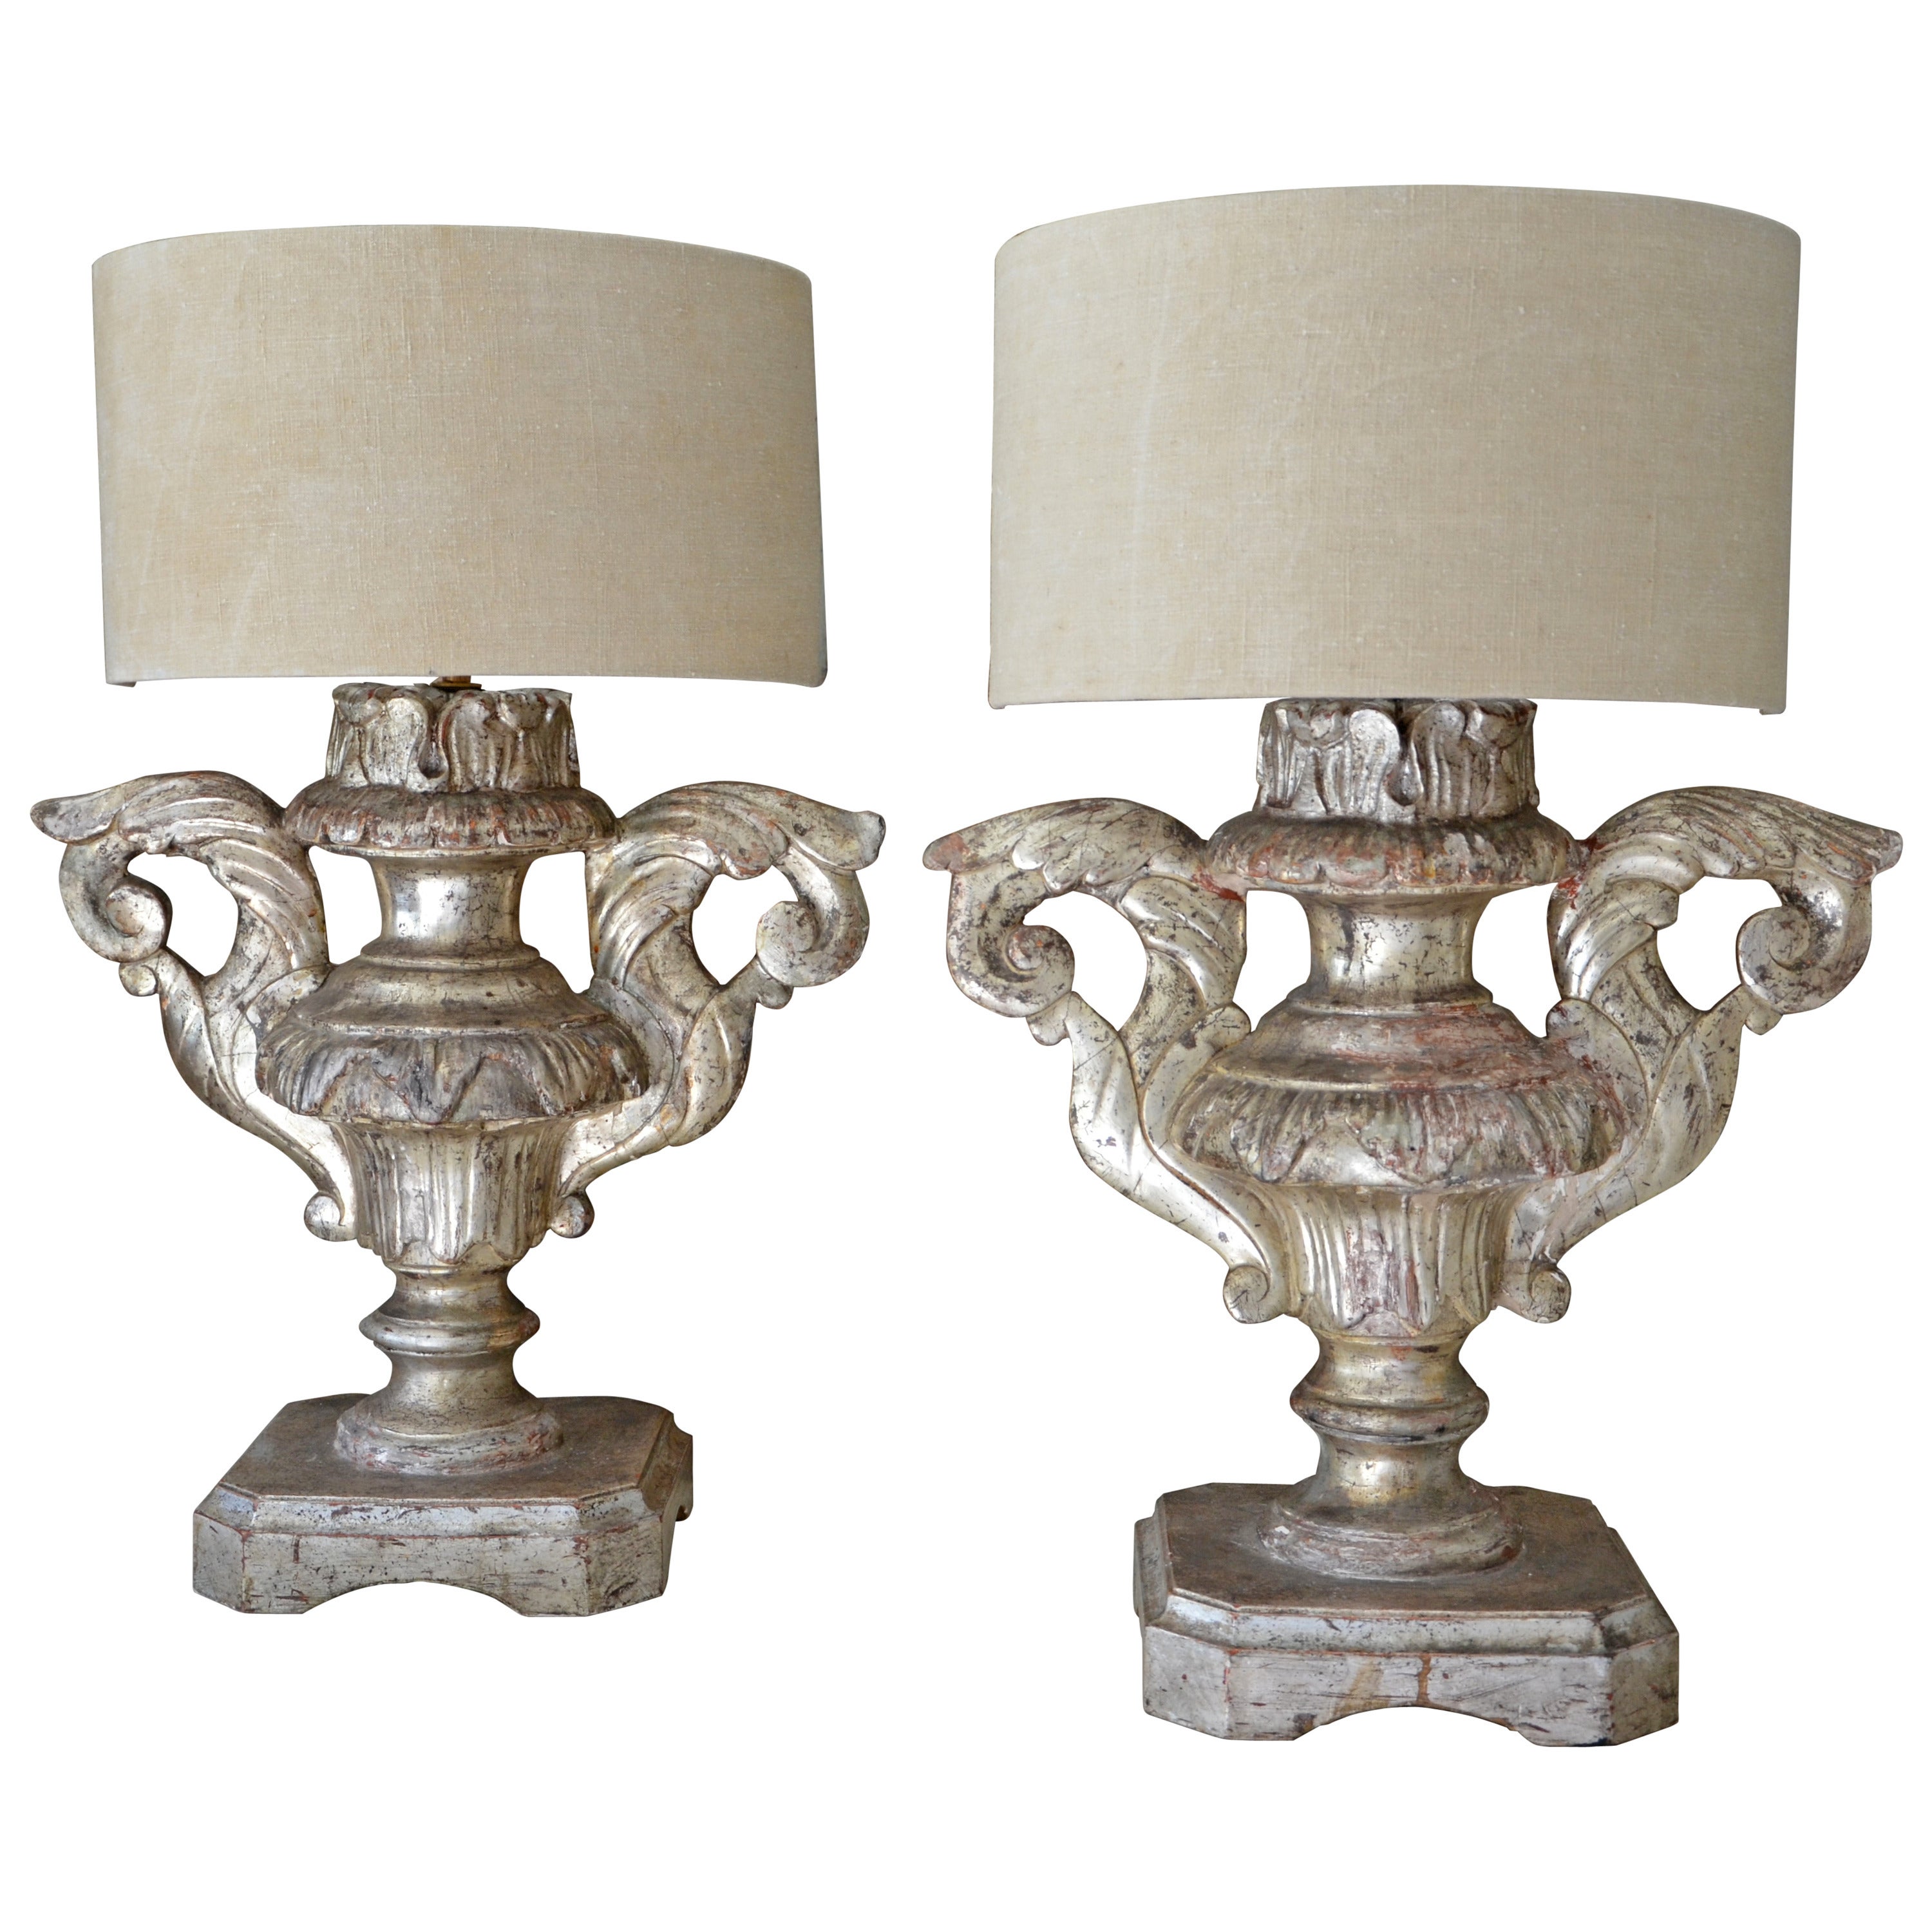 Pair of 18th Century Italian Silver Giltwood Altar Candleholders as Lamps